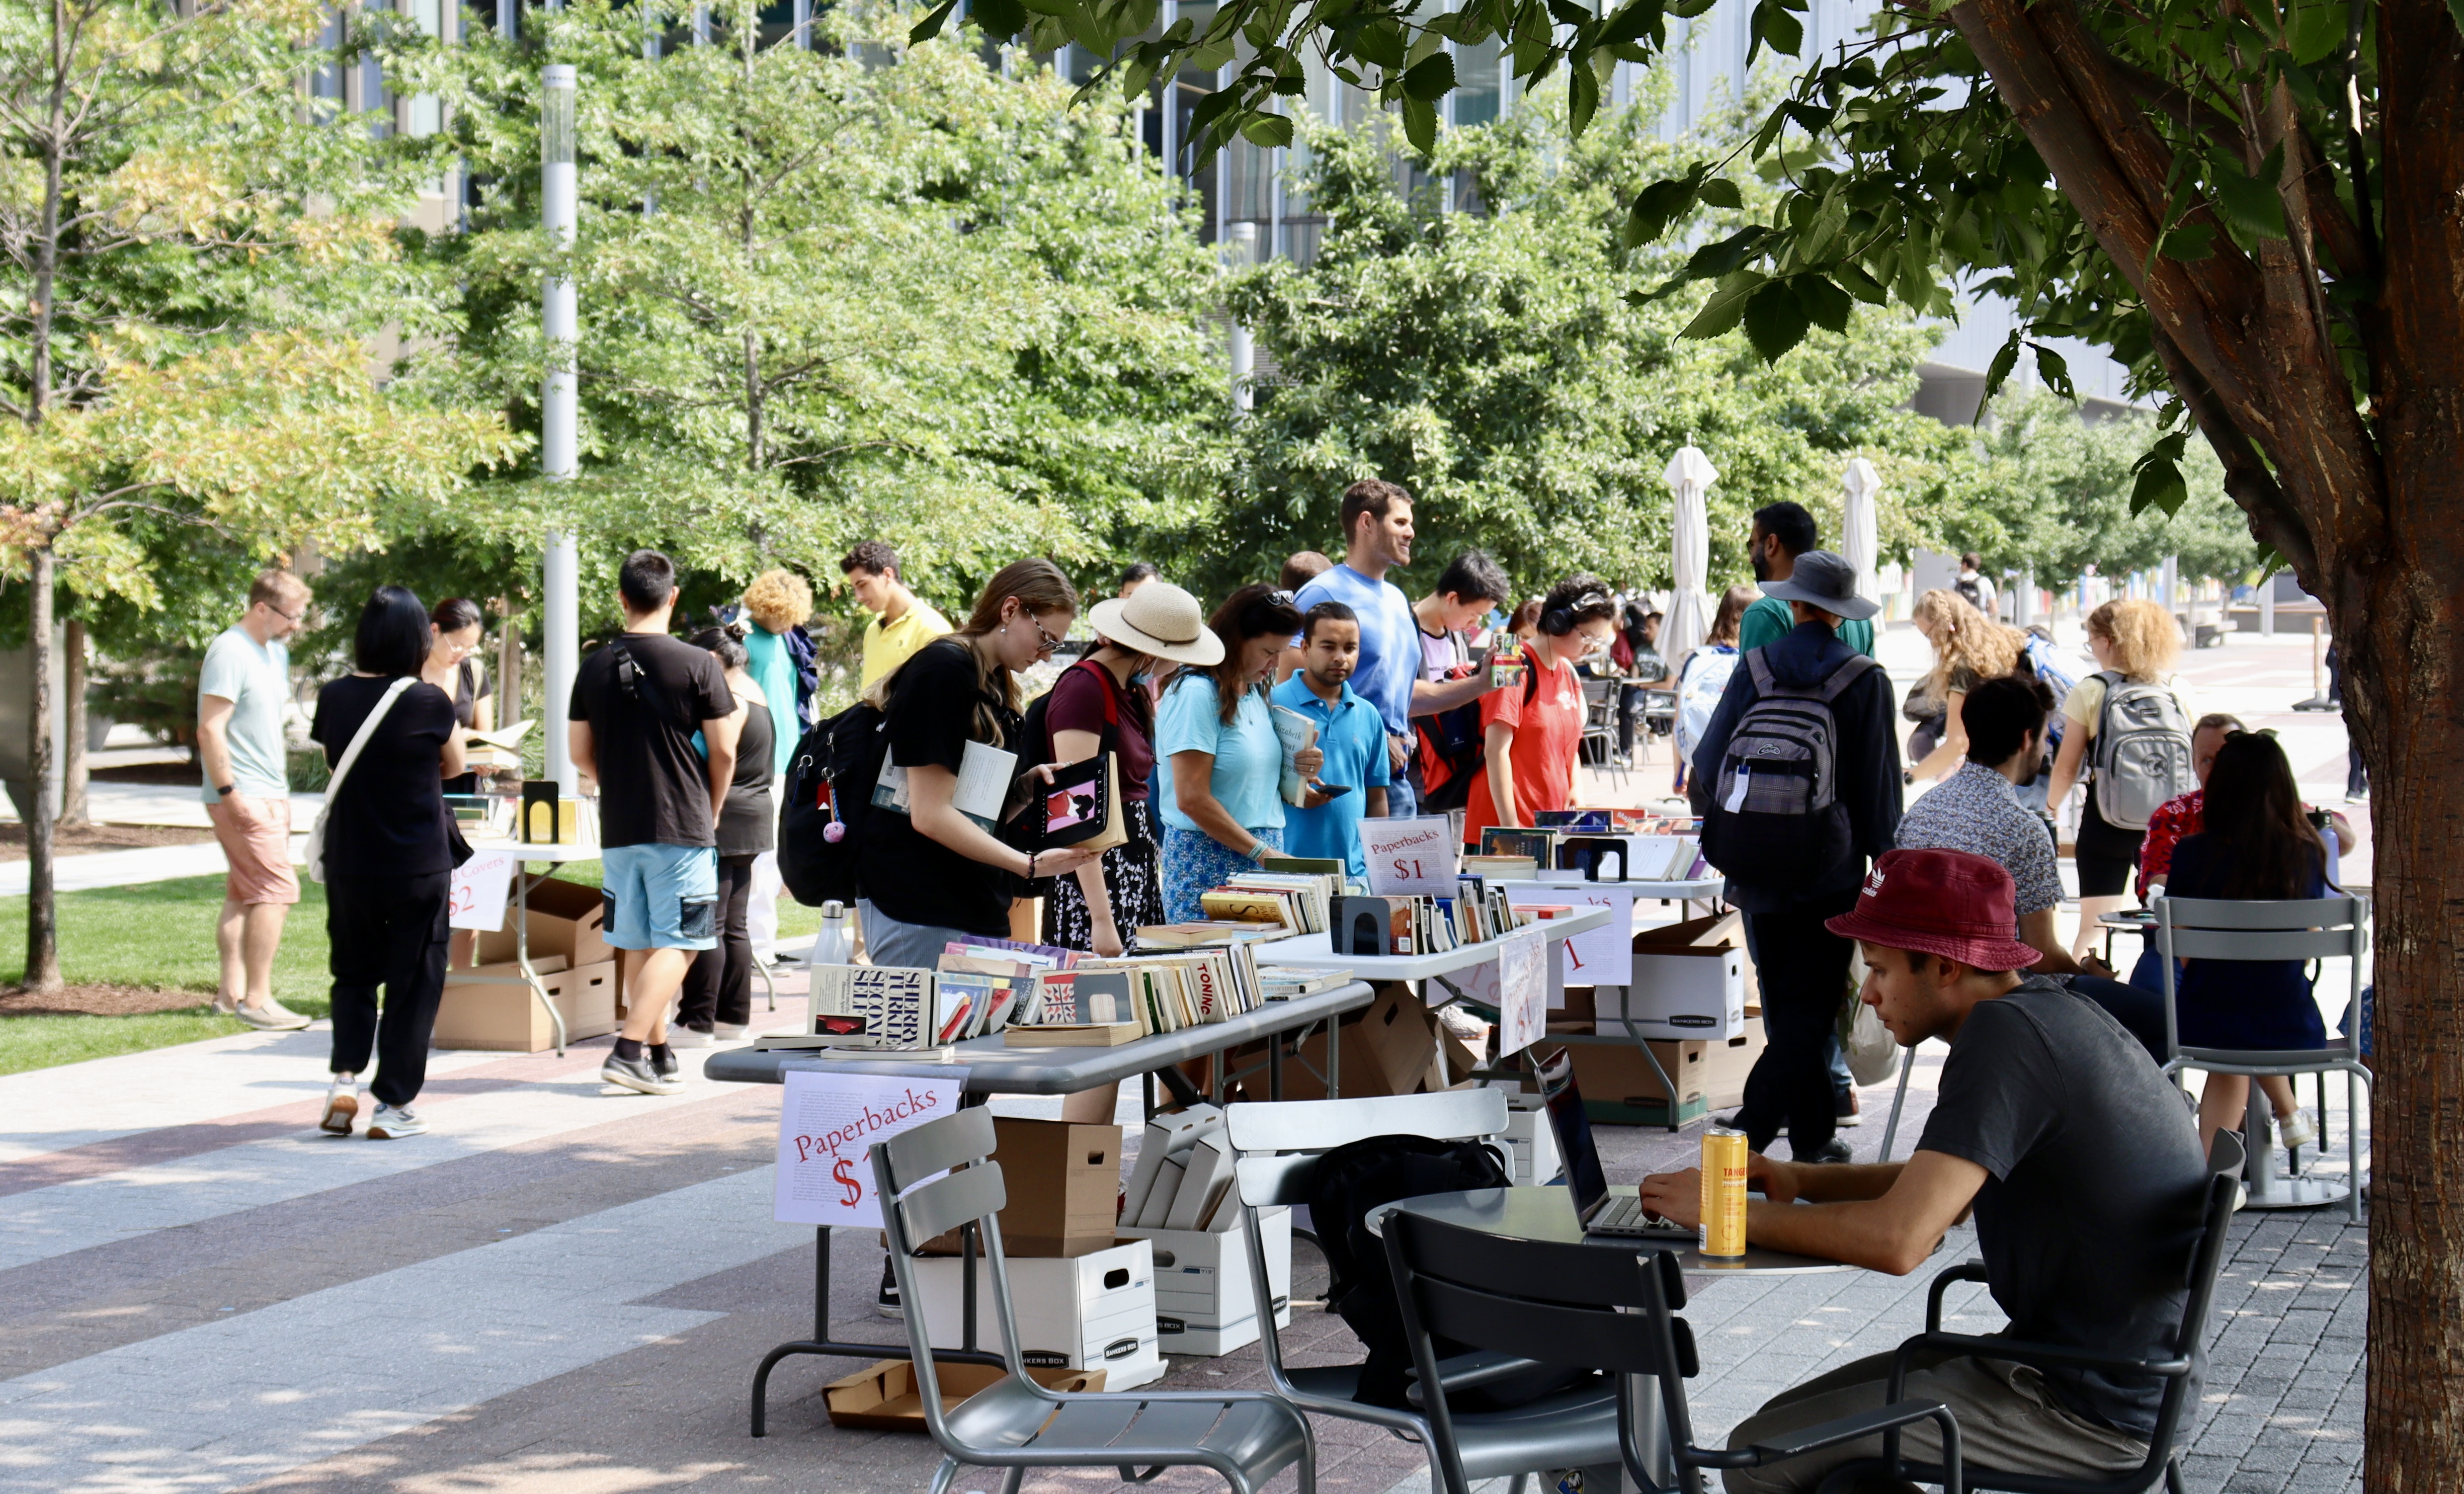 The Kendall/MIT Open Space warmly welcomed community members to a book sale on a hot September day.